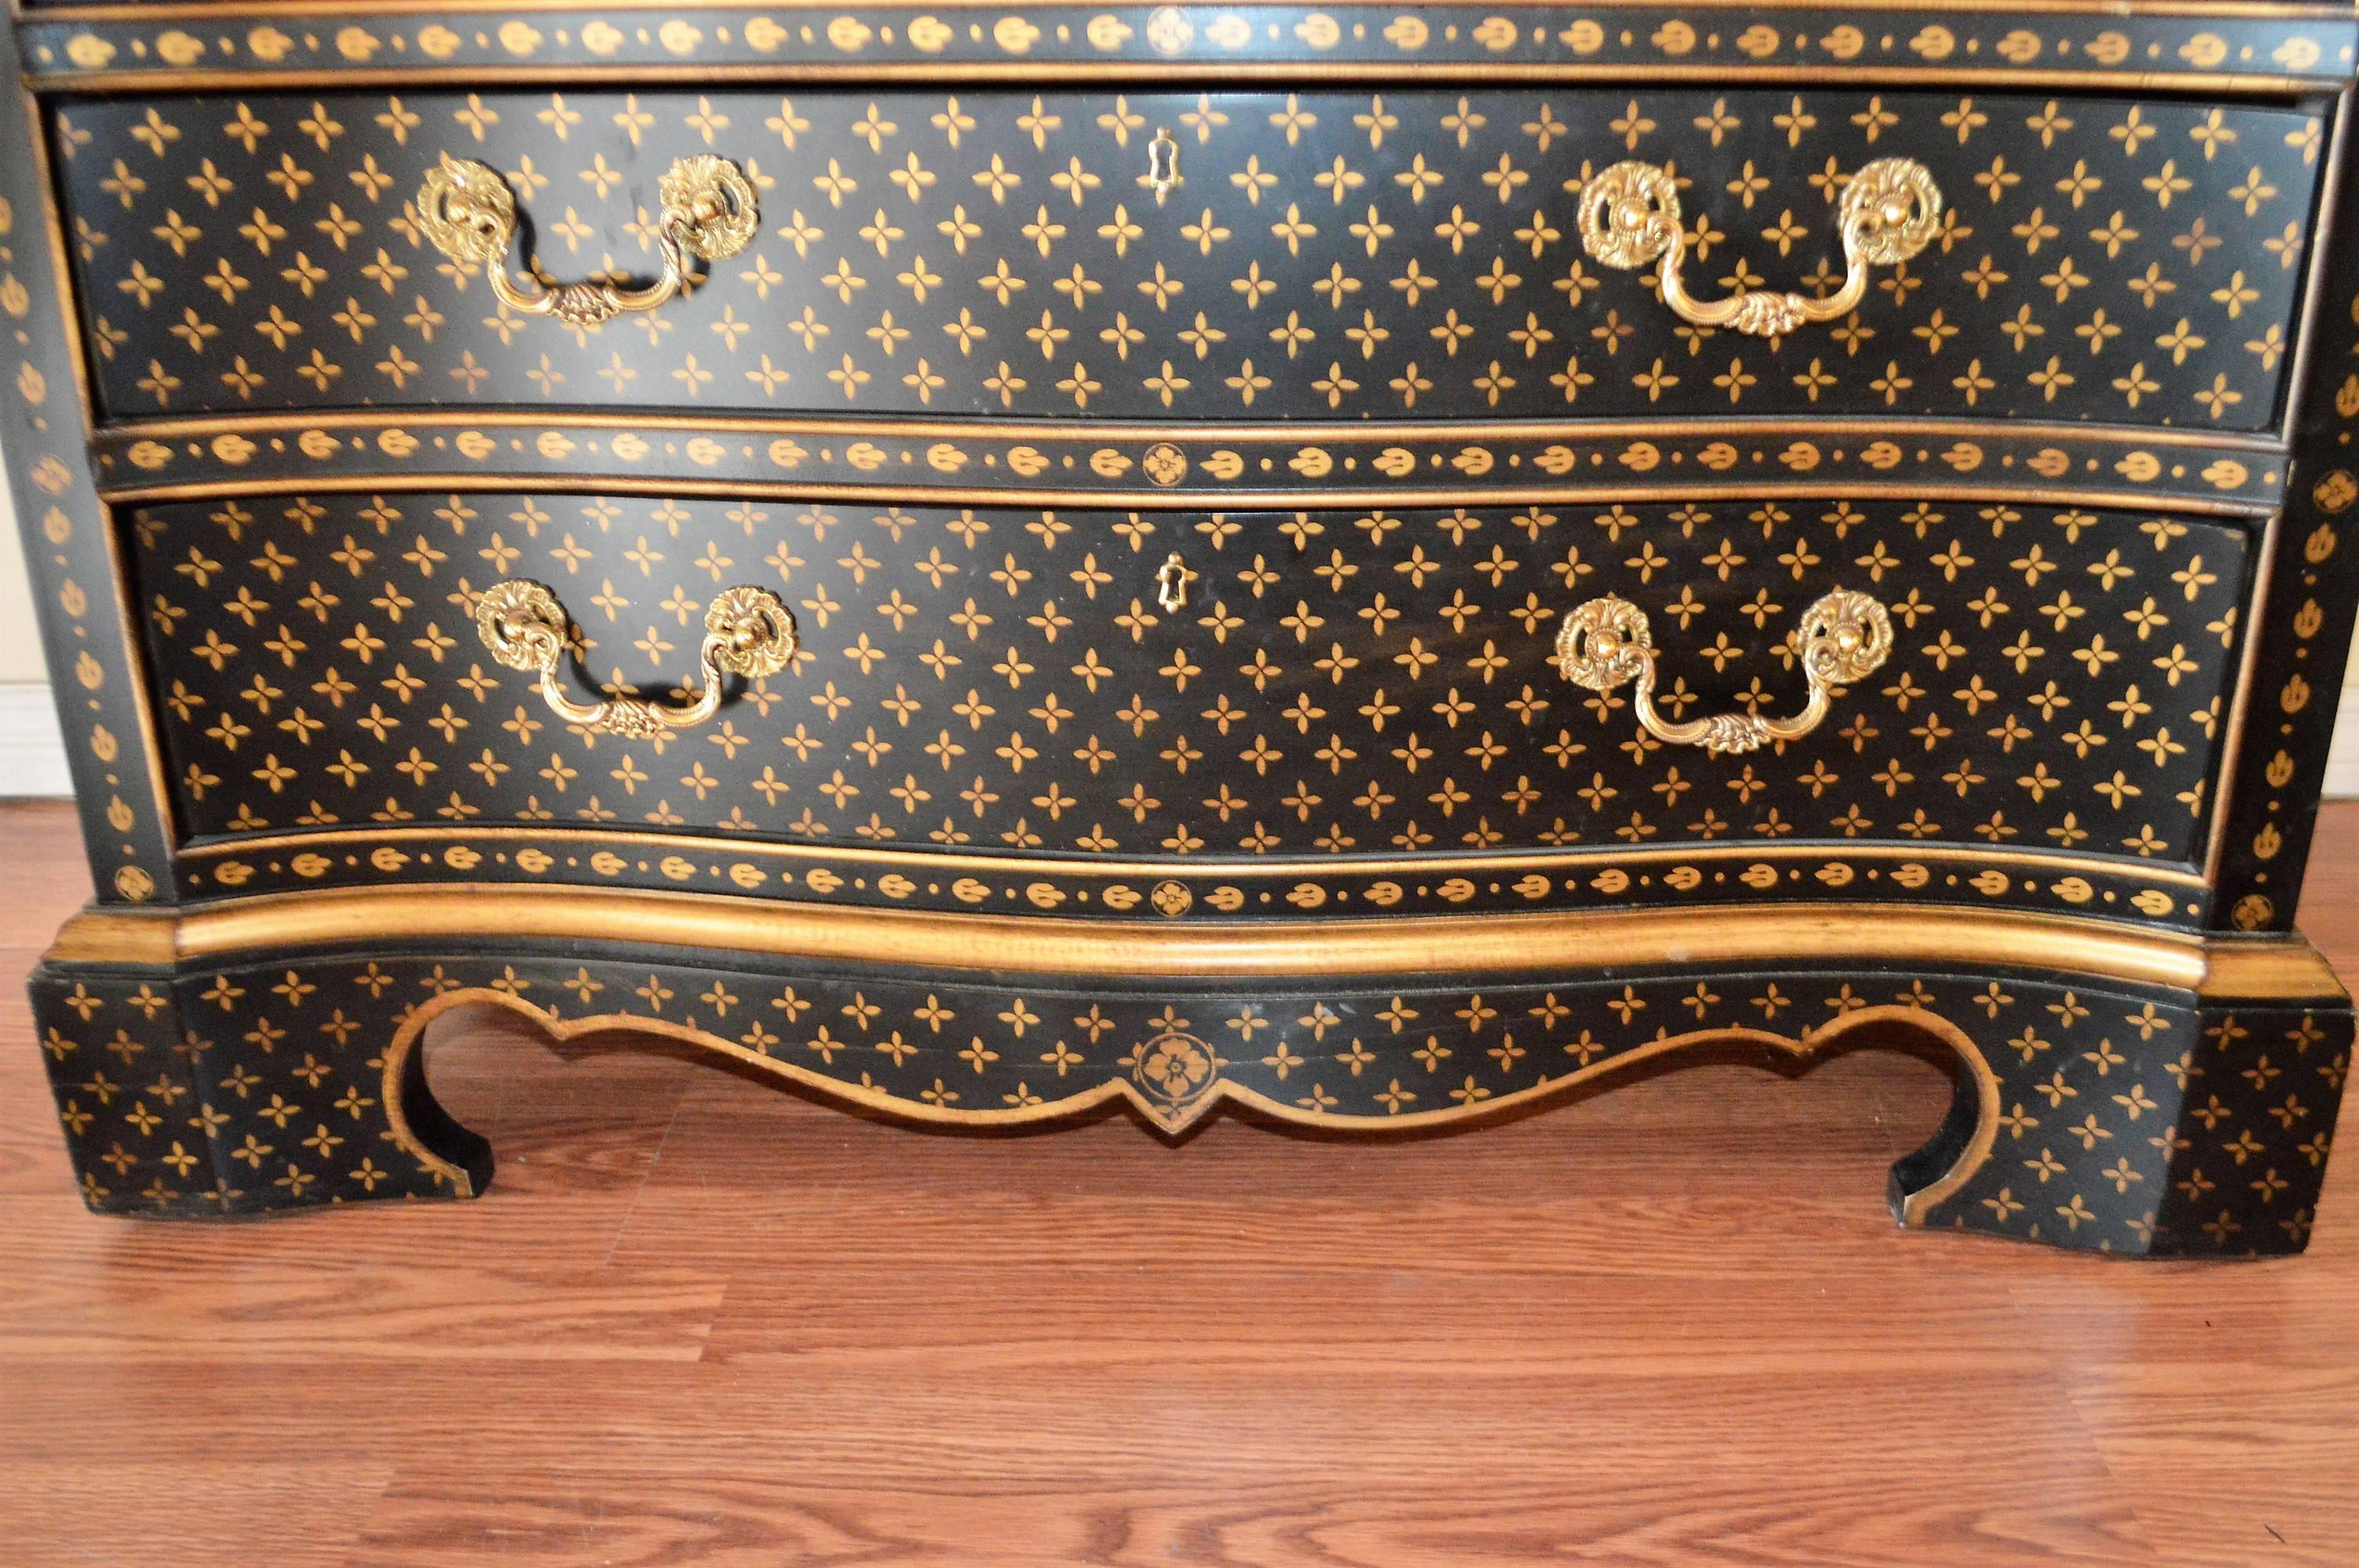 American Louis Vuitton Inspired Decorative Commode Executed in a Georgian Style